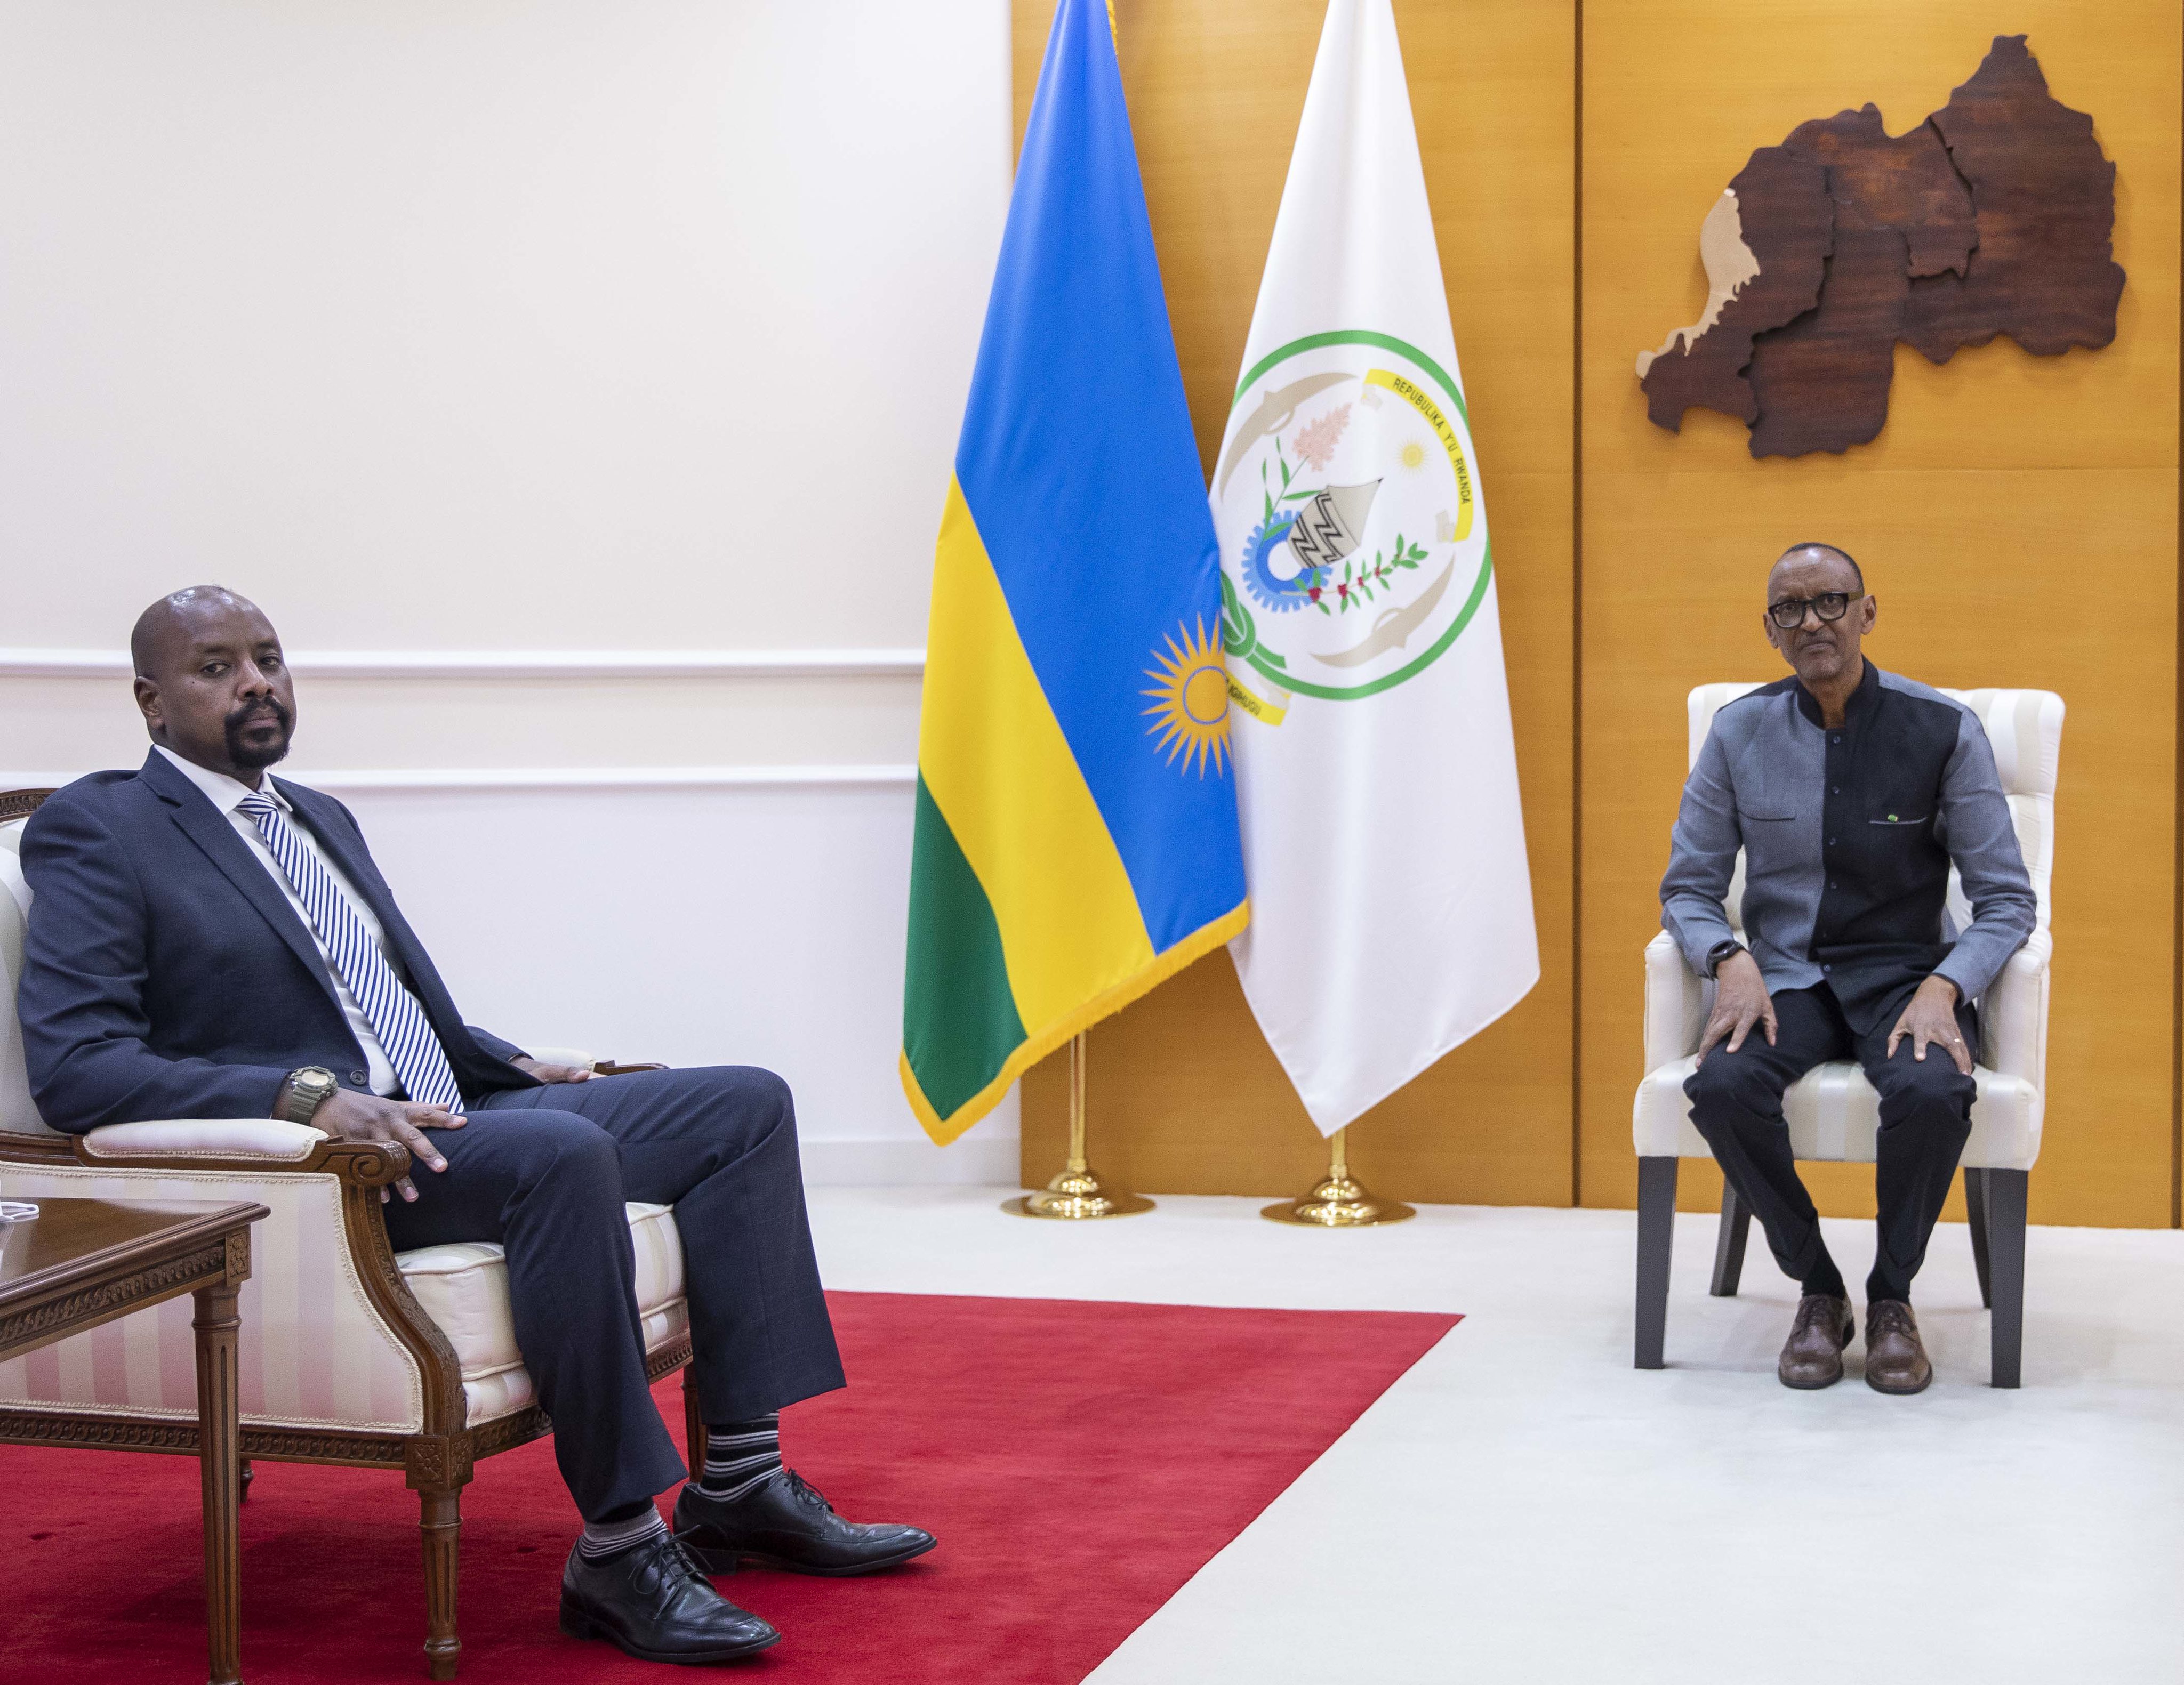 President Kagame receives Muhoozi to discuss the Rwanda-Uganda relations in Kigali on March 14. The meeting took place at Village Urugwiro.